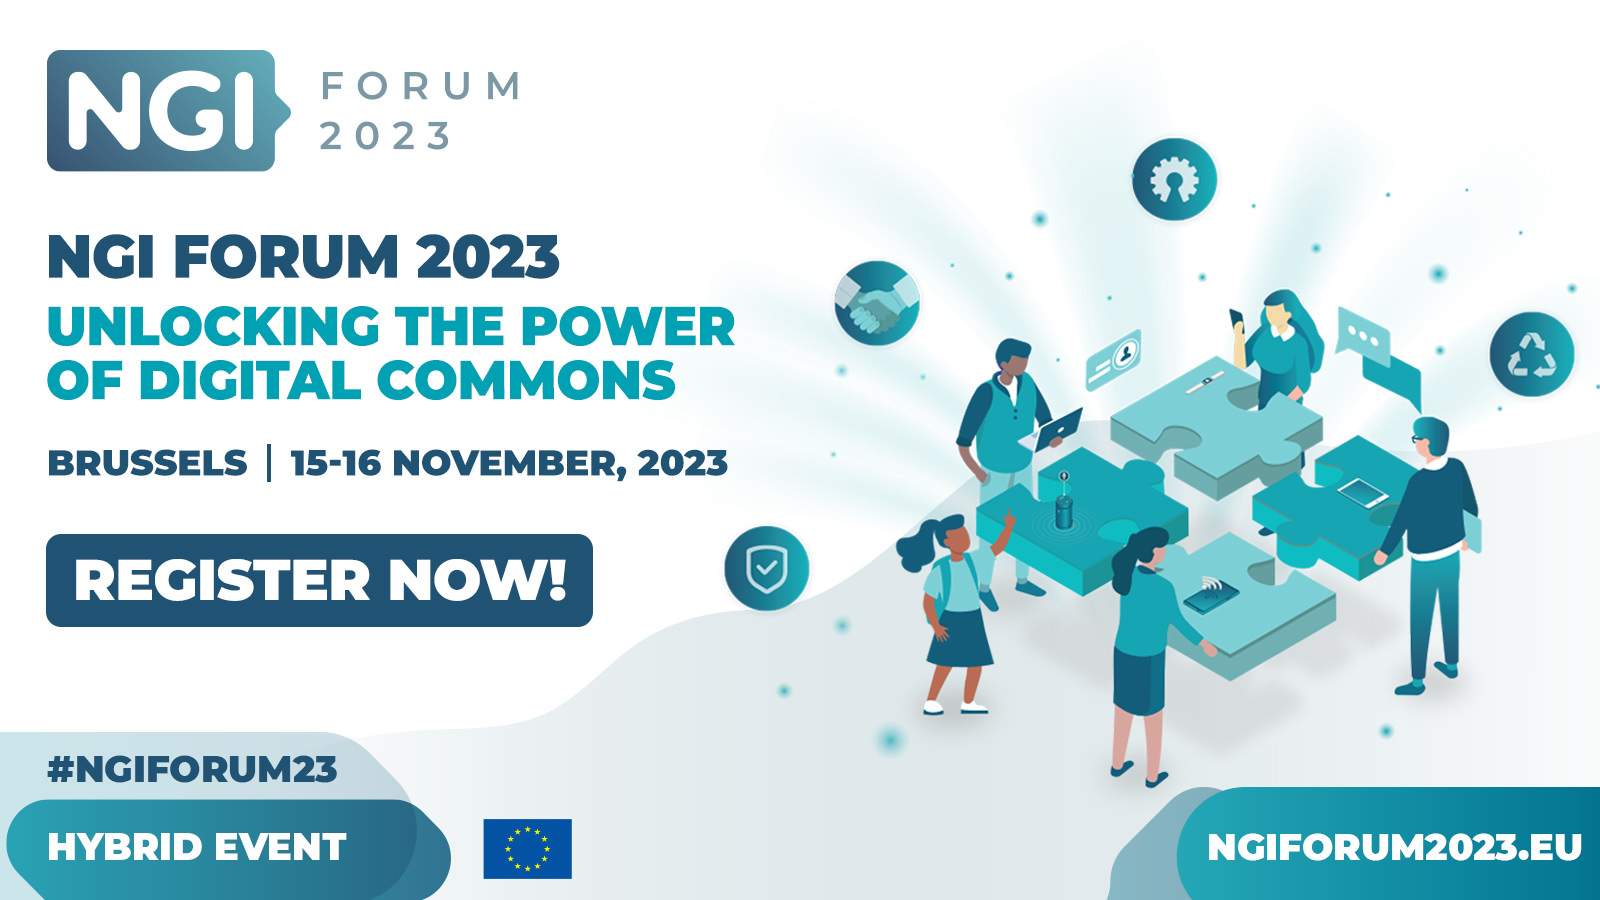 Flyer in blue text announcing the NGI Forum 2023, Brussels 15-16 November, register now, hybrid event